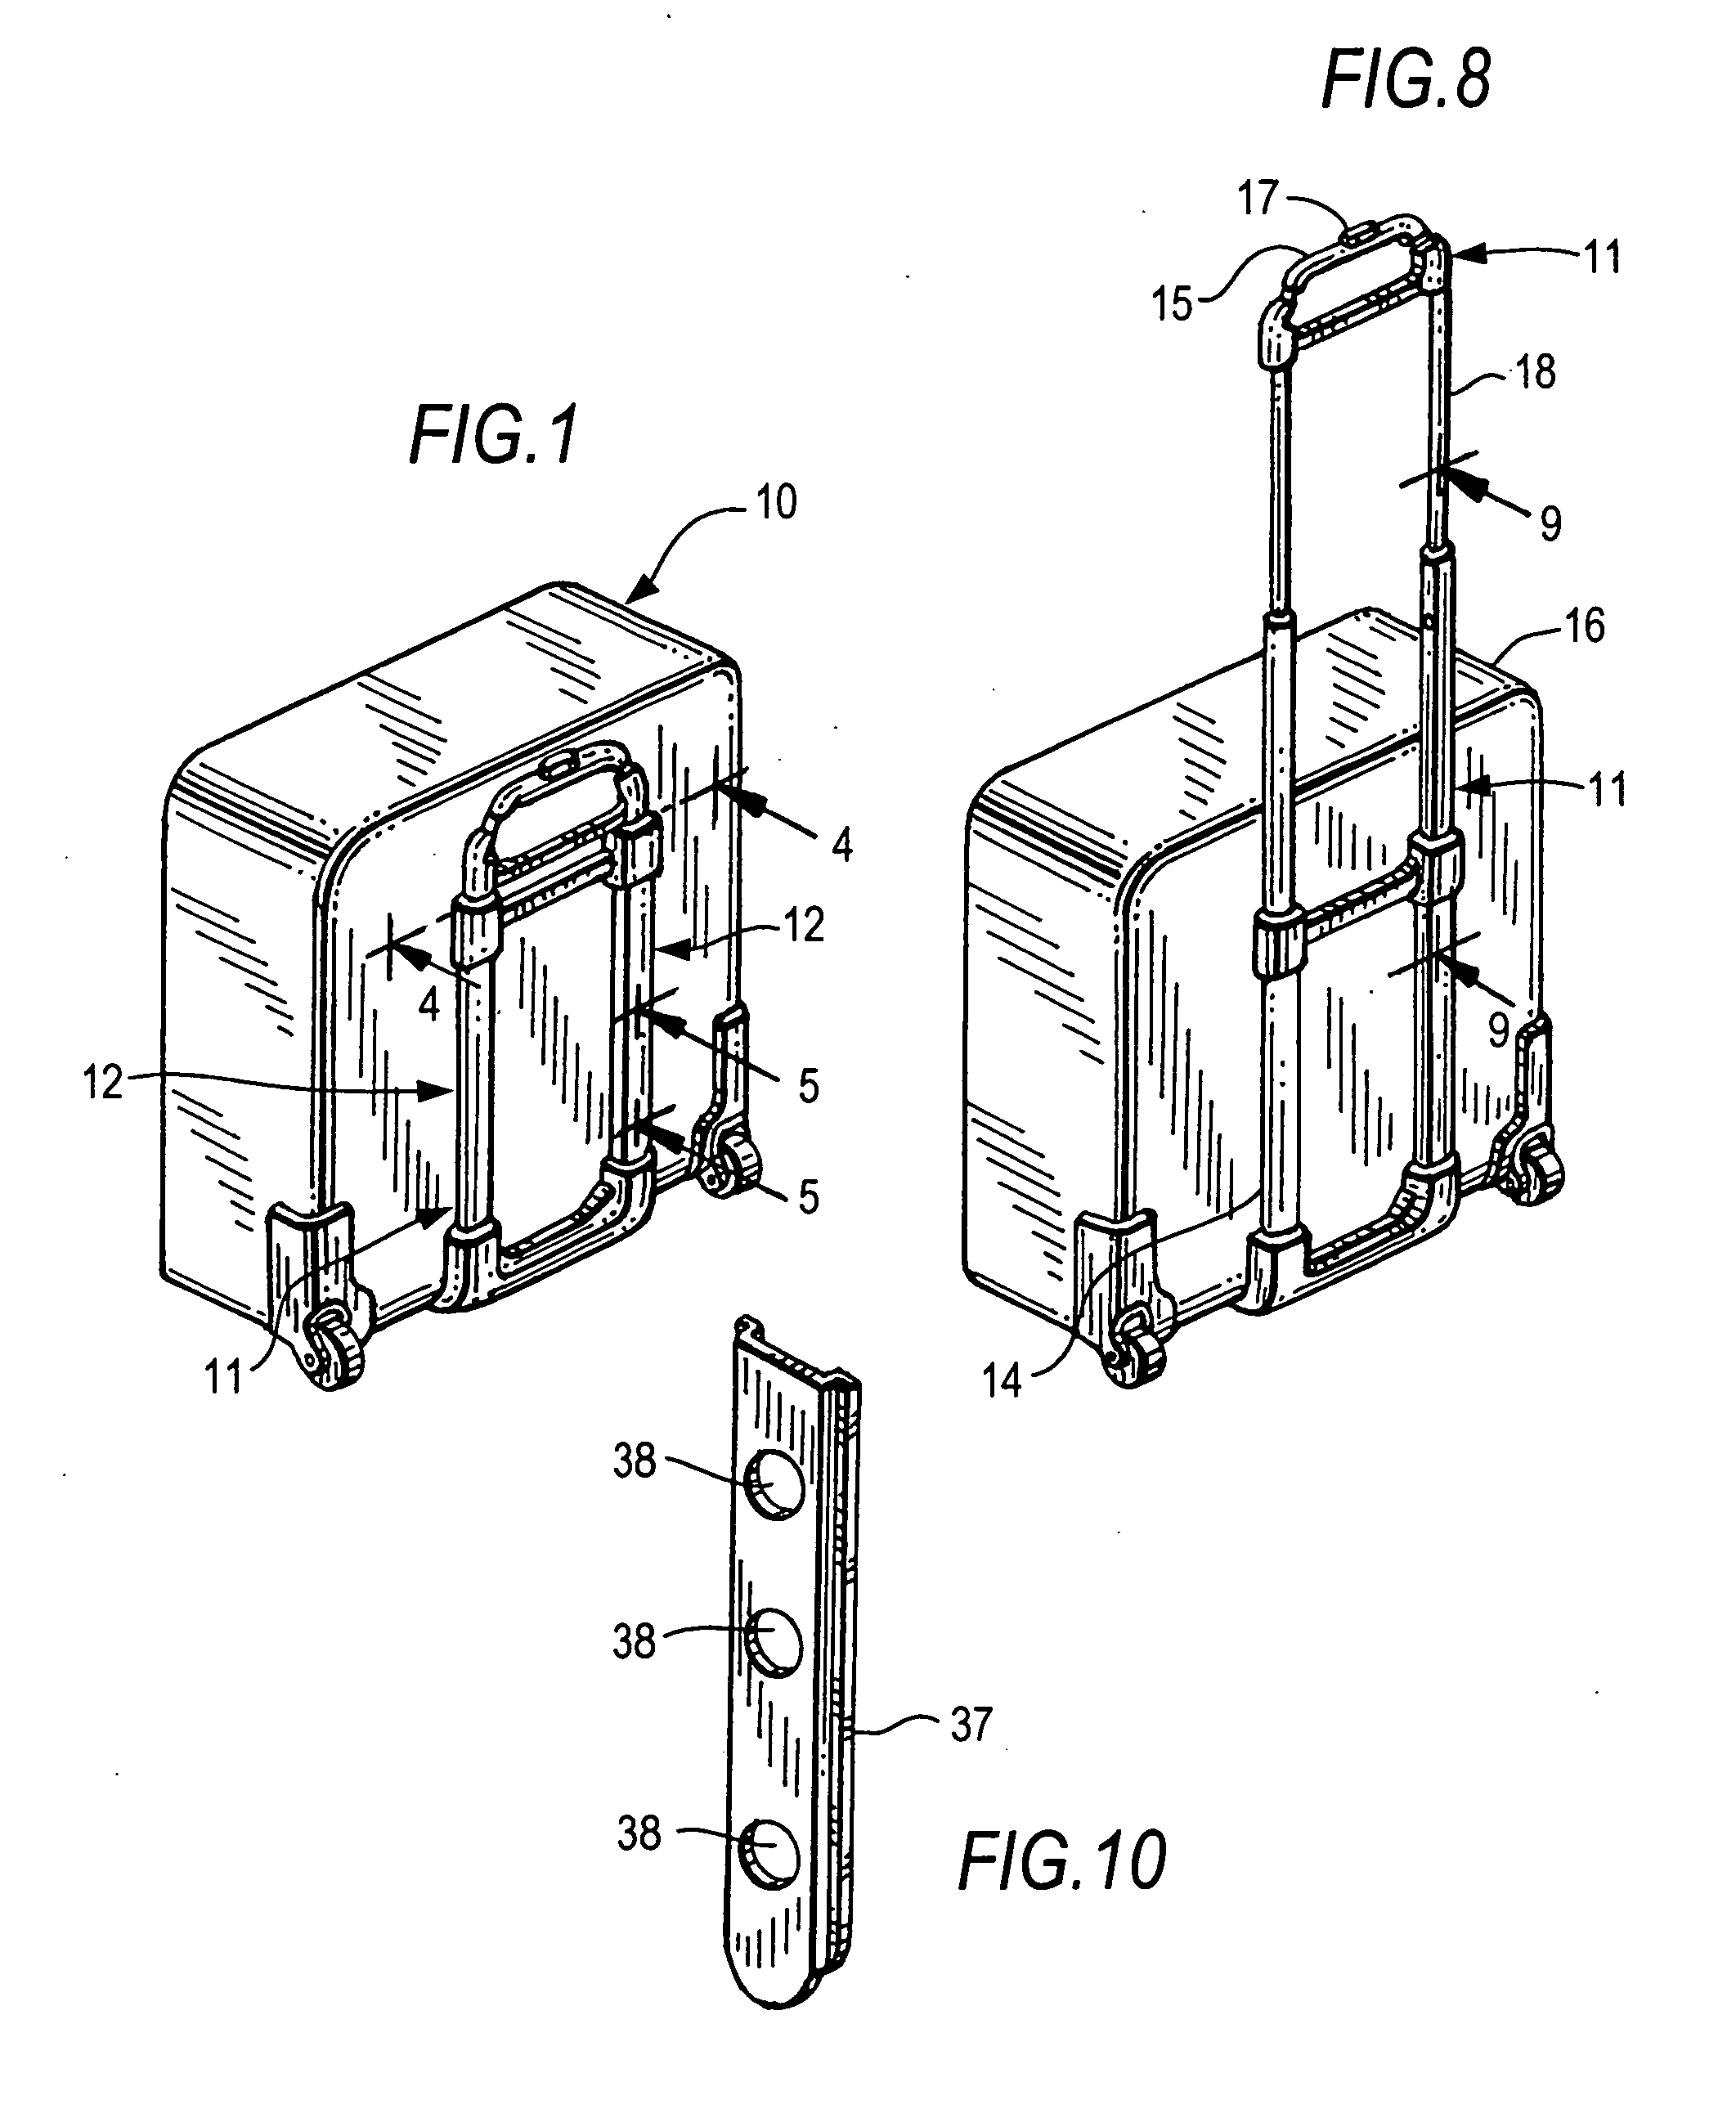 Reinforced extruded tubing for telescopic handle for trolley-type carry case and carry case incorporating same